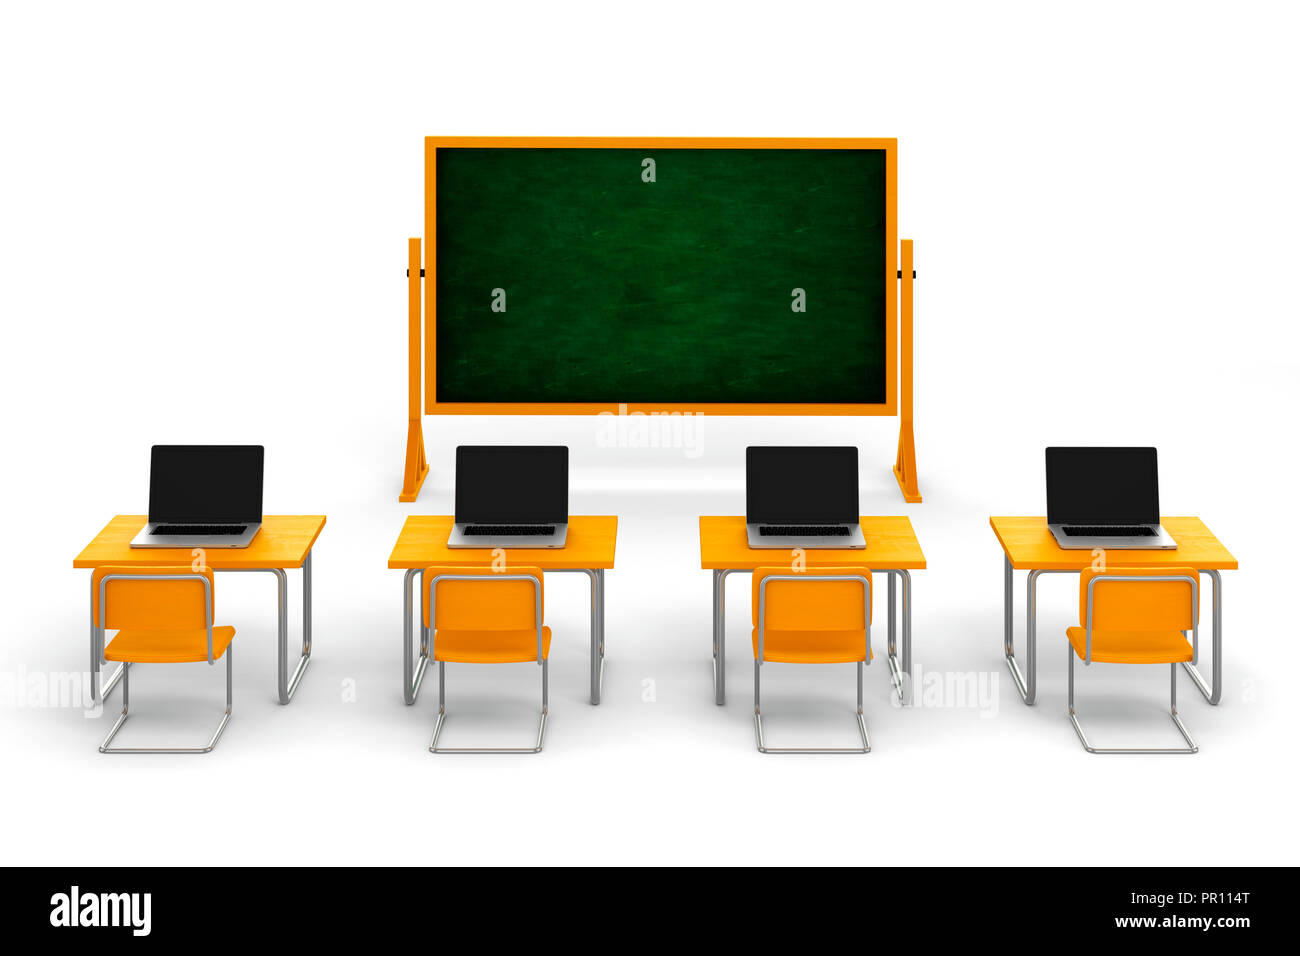 3d Classroom With Desks And Laptops On White Background Stock